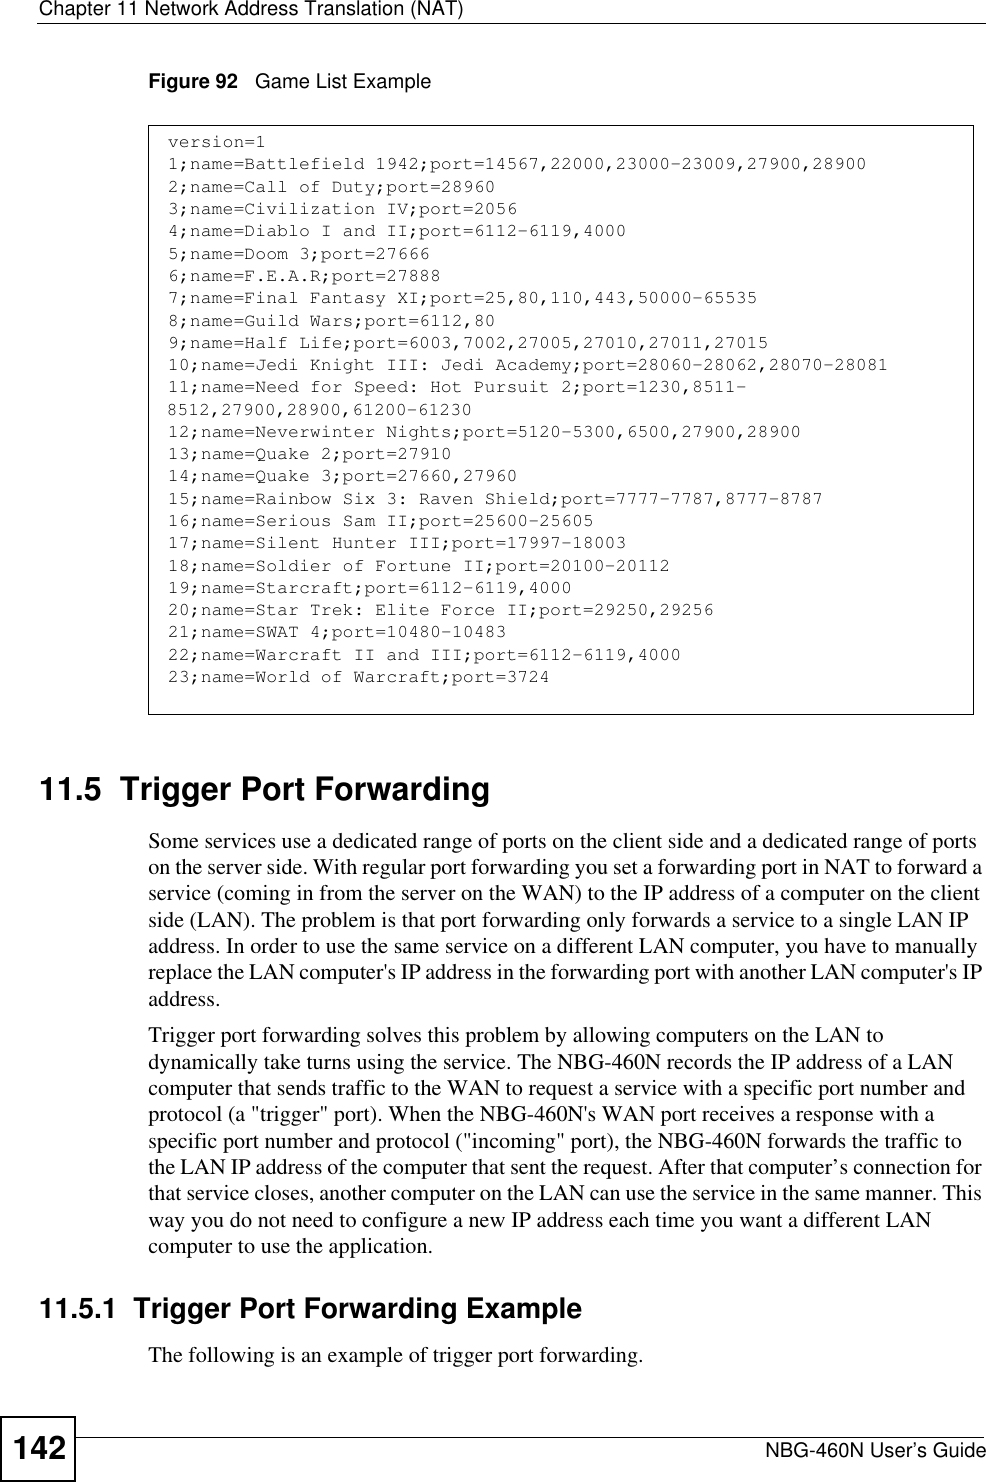 Chapter 11 Network Address Translation (NAT)NBG-460N User’s Guide142Figure 92   Game List Example11.5  Trigger Port Forwarding Some services use a dedicated range of ports on the client side and a dedicated range of ports on the server side. With regular port forwarding you set a forwarding port in NAT to forward a service (coming in from the server on the WAN) to the IP address of a computer on the client side (LAN). The problem is that port forwarding only forwards a service to a single LAN IP address. In order to use the same service on a different LAN computer, you have to manually replace the LAN computer&apos;s IP address in the forwarding port with another LAN computer&apos;s IP address. Trigger port forwarding solves this problem by allowing computers on the LAN to dynamically take turns using the service. The NBG-460N records the IP address of a LAN computer that sends traffic to the WAN to request a service with a specific port number and protocol (a &quot;trigger&quot; port). When the NBG-460N&apos;s WAN port receives a response with a specific port number and protocol (&quot;incoming&quot; port), the NBG-460N forwards the traffic to the LAN IP address of the computer that sent the request. After that computer’s connection for that service closes, another computer on the LAN can use the service in the same manner. This way you do not need to configure a new IP address each time you want a different LAN computer to use the application.11.5.1  Trigger Port Forwarding Example The following is an example of trigger port forwarding.version=11;name=Battlefield 1942;port=14567,22000,23000-23009,27900,289002;name=Call of Duty;port=289603;name=Civilization IV;port=20564;name=Diablo I and II;port=6112-6119,40005;name=Doom 3;port=276666;name=F.E.A.R;port=278887;name=Final Fantasy XI;port=25,80,110,443,50000-655358;name=Guild Wars;port=6112,809;name=Half Life;port=6003,7002,27005,27010,27011,2701510;name=Jedi Knight III: Jedi Academy;port=28060-28062,28070-2808111;name=Need for Speed: Hot Pursuit 2;port=1230,8511-8512,27900,28900,61200-6123012;name=Neverwinter Nights;port=5120-5300,6500,27900,2890013;name=Quake 2;port=2791014;name=Quake 3;port=27660,2796015;name=Rainbow Six 3: Raven Shield;port=7777-7787,8777-878716;name=Serious Sam II;port=25600-2560517;name=Silent Hunter III;port=17997-1800318;name=Soldier of Fortune II;port=20100-2011219;name=Starcraft;port=6112-6119,400020;name=Star Trek: Elite Force II;port=29250,2925621;name=SWAT 4;port=10480-1048322;name=Warcraft II and III;port=6112-6119,400023;name=World of Warcraft;port=3724